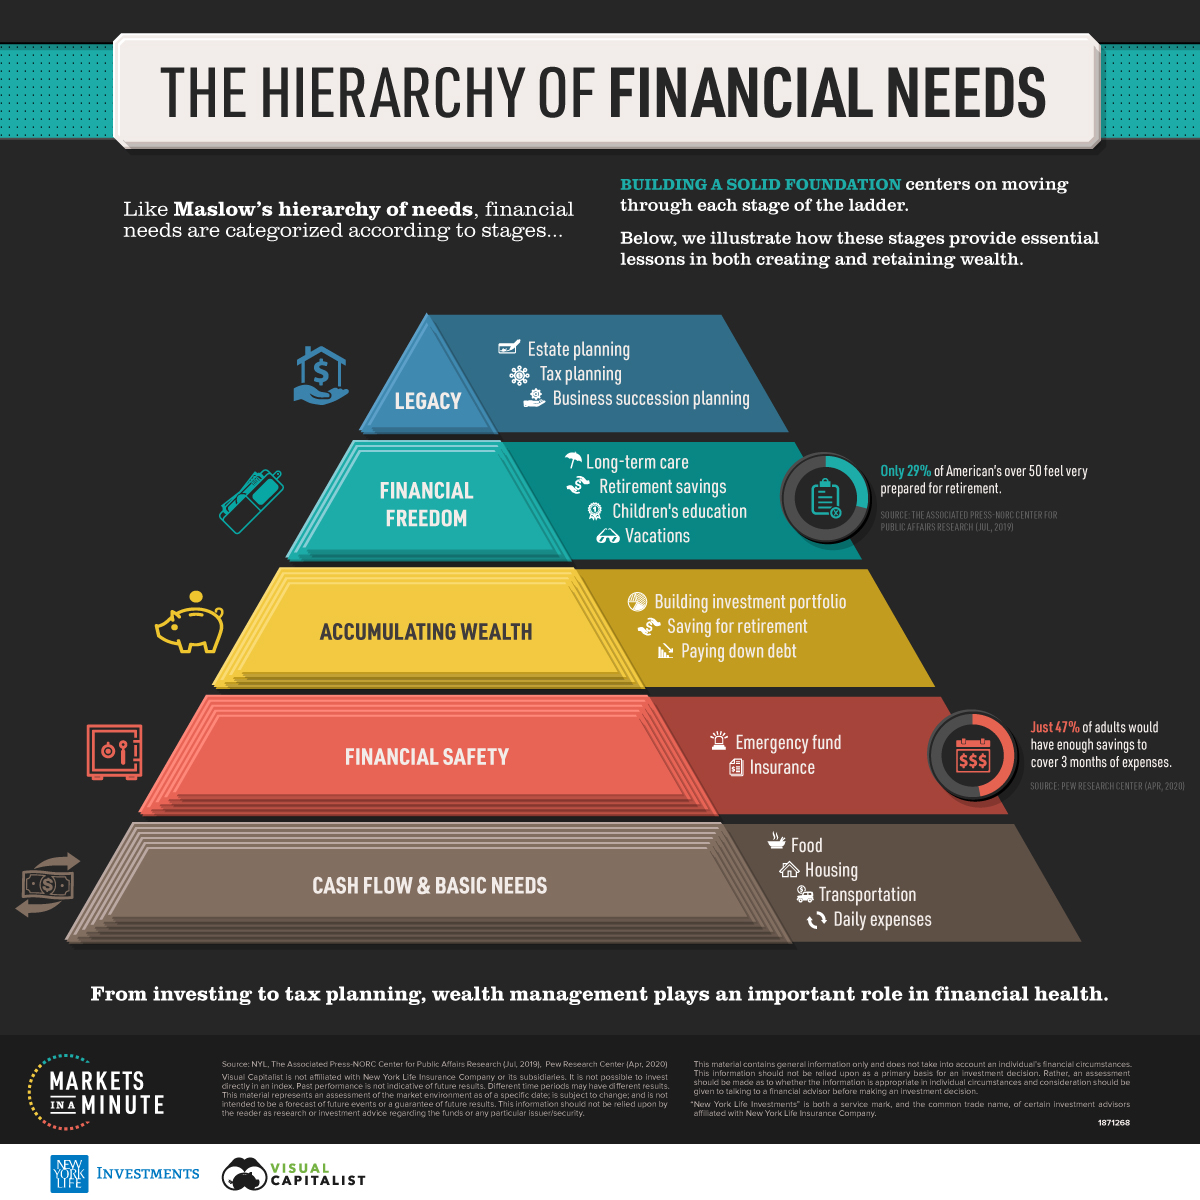 New-York-Life-Hierarchy-of-Financial-Needs-estate planning-attorney-Wellesley-MA-02481